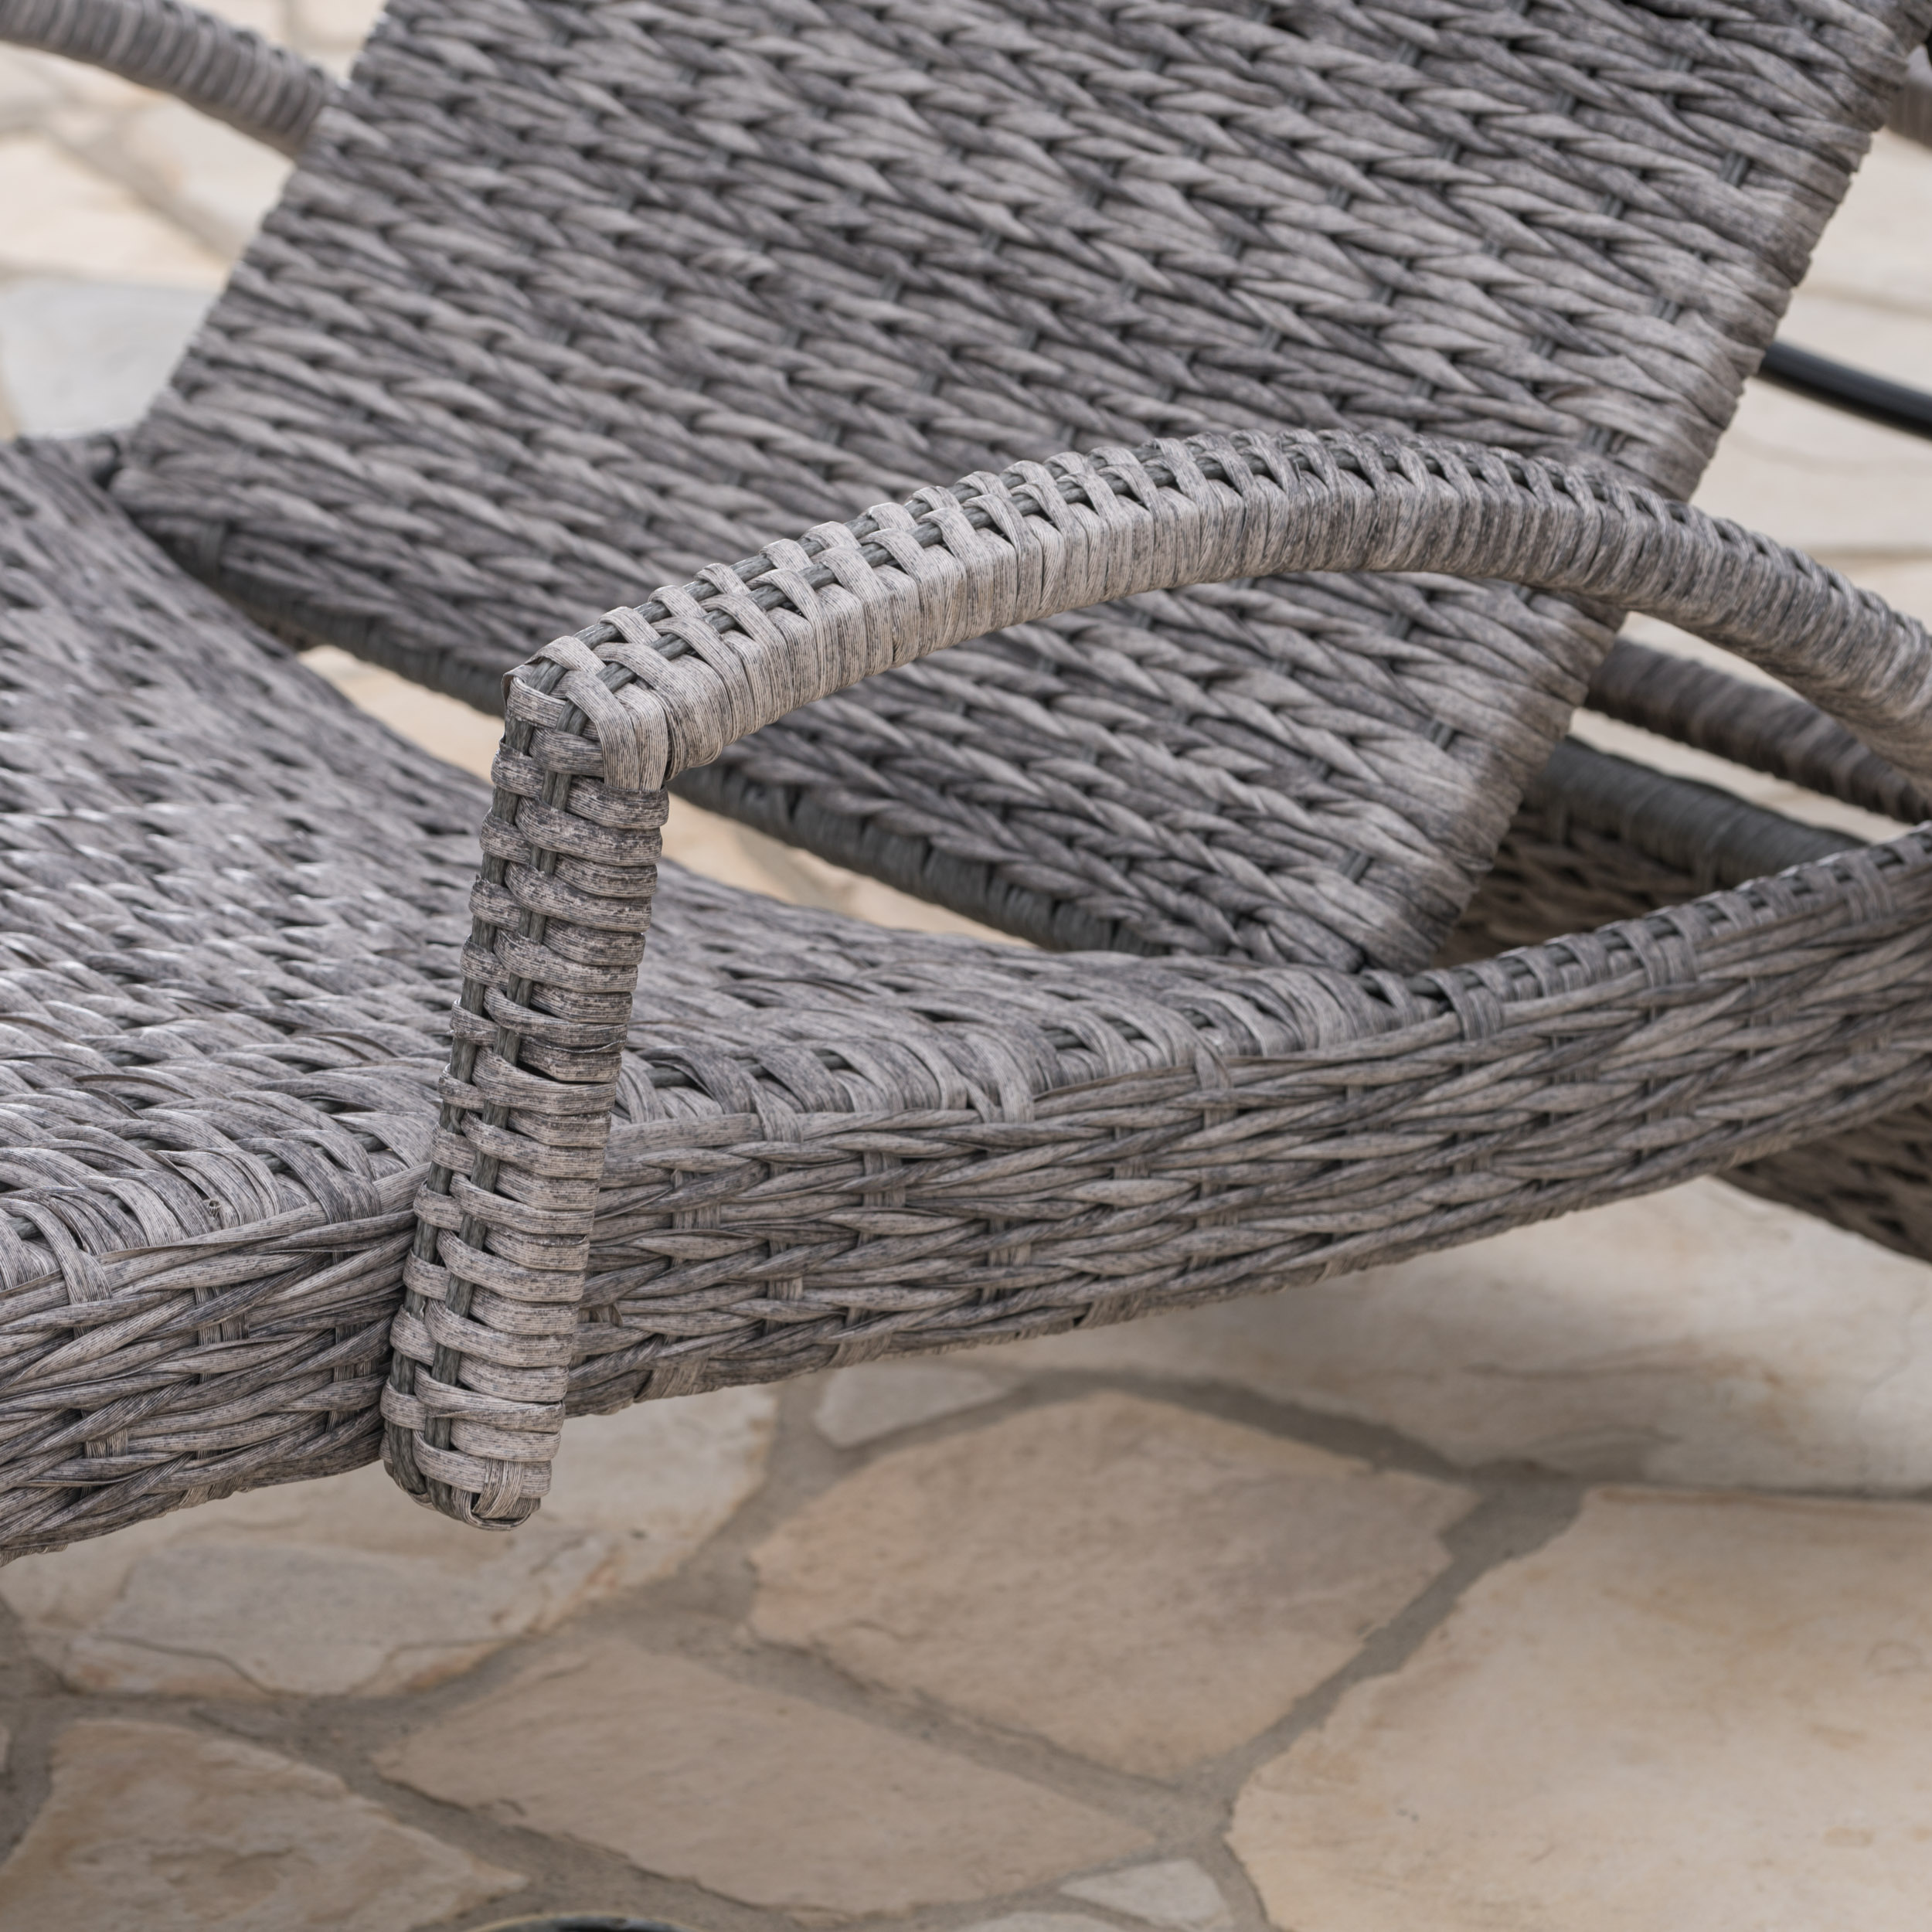 Emerald Outdoor 3 Piece Armed Wicker Chaise Lounges with Rectangular Side Table, Grey - image 3 of 6